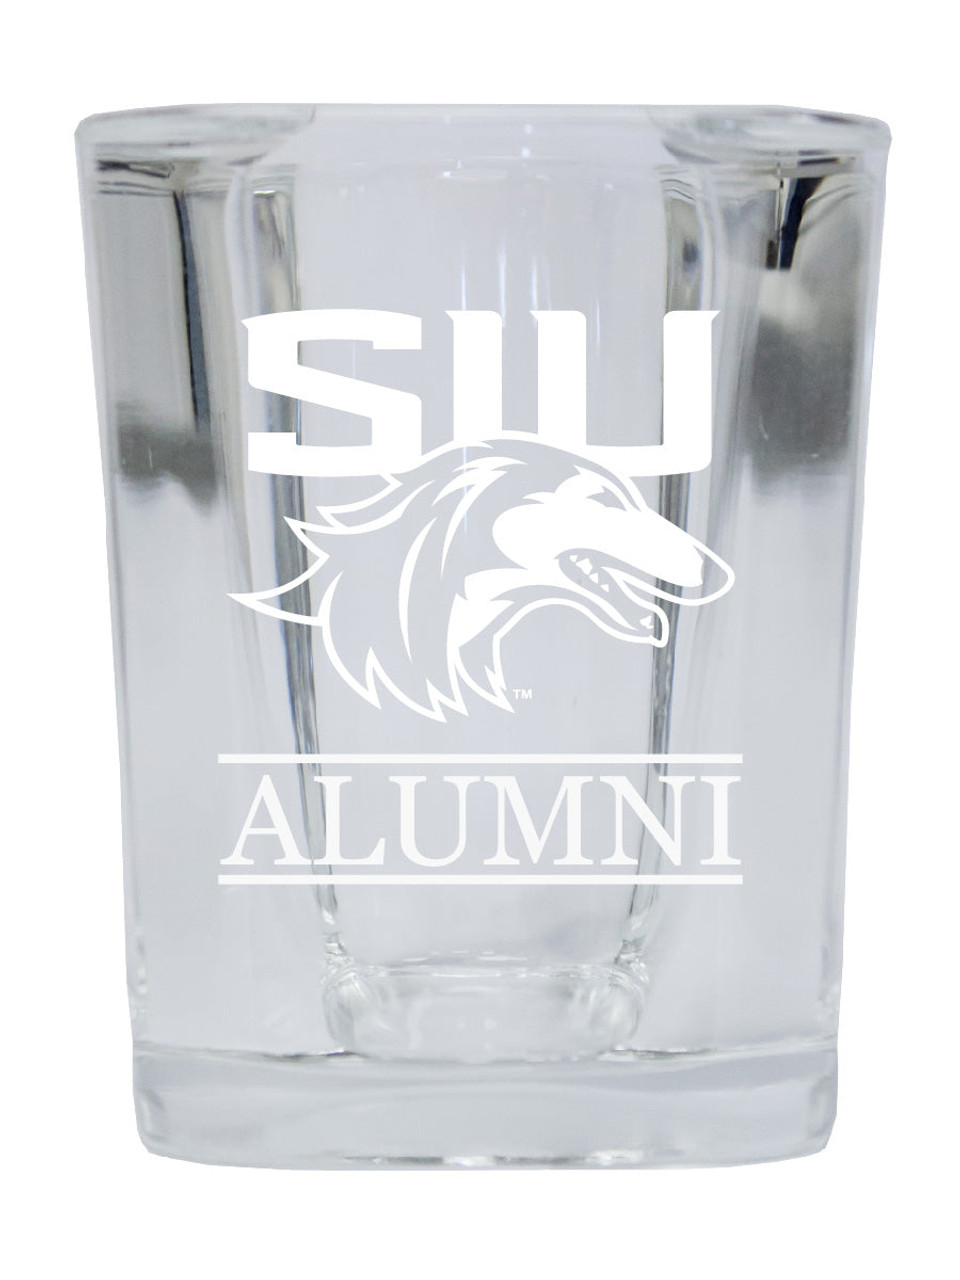 Southern Illinois Salukis 2 Ounce Square Shot Glass laser etched logo Design